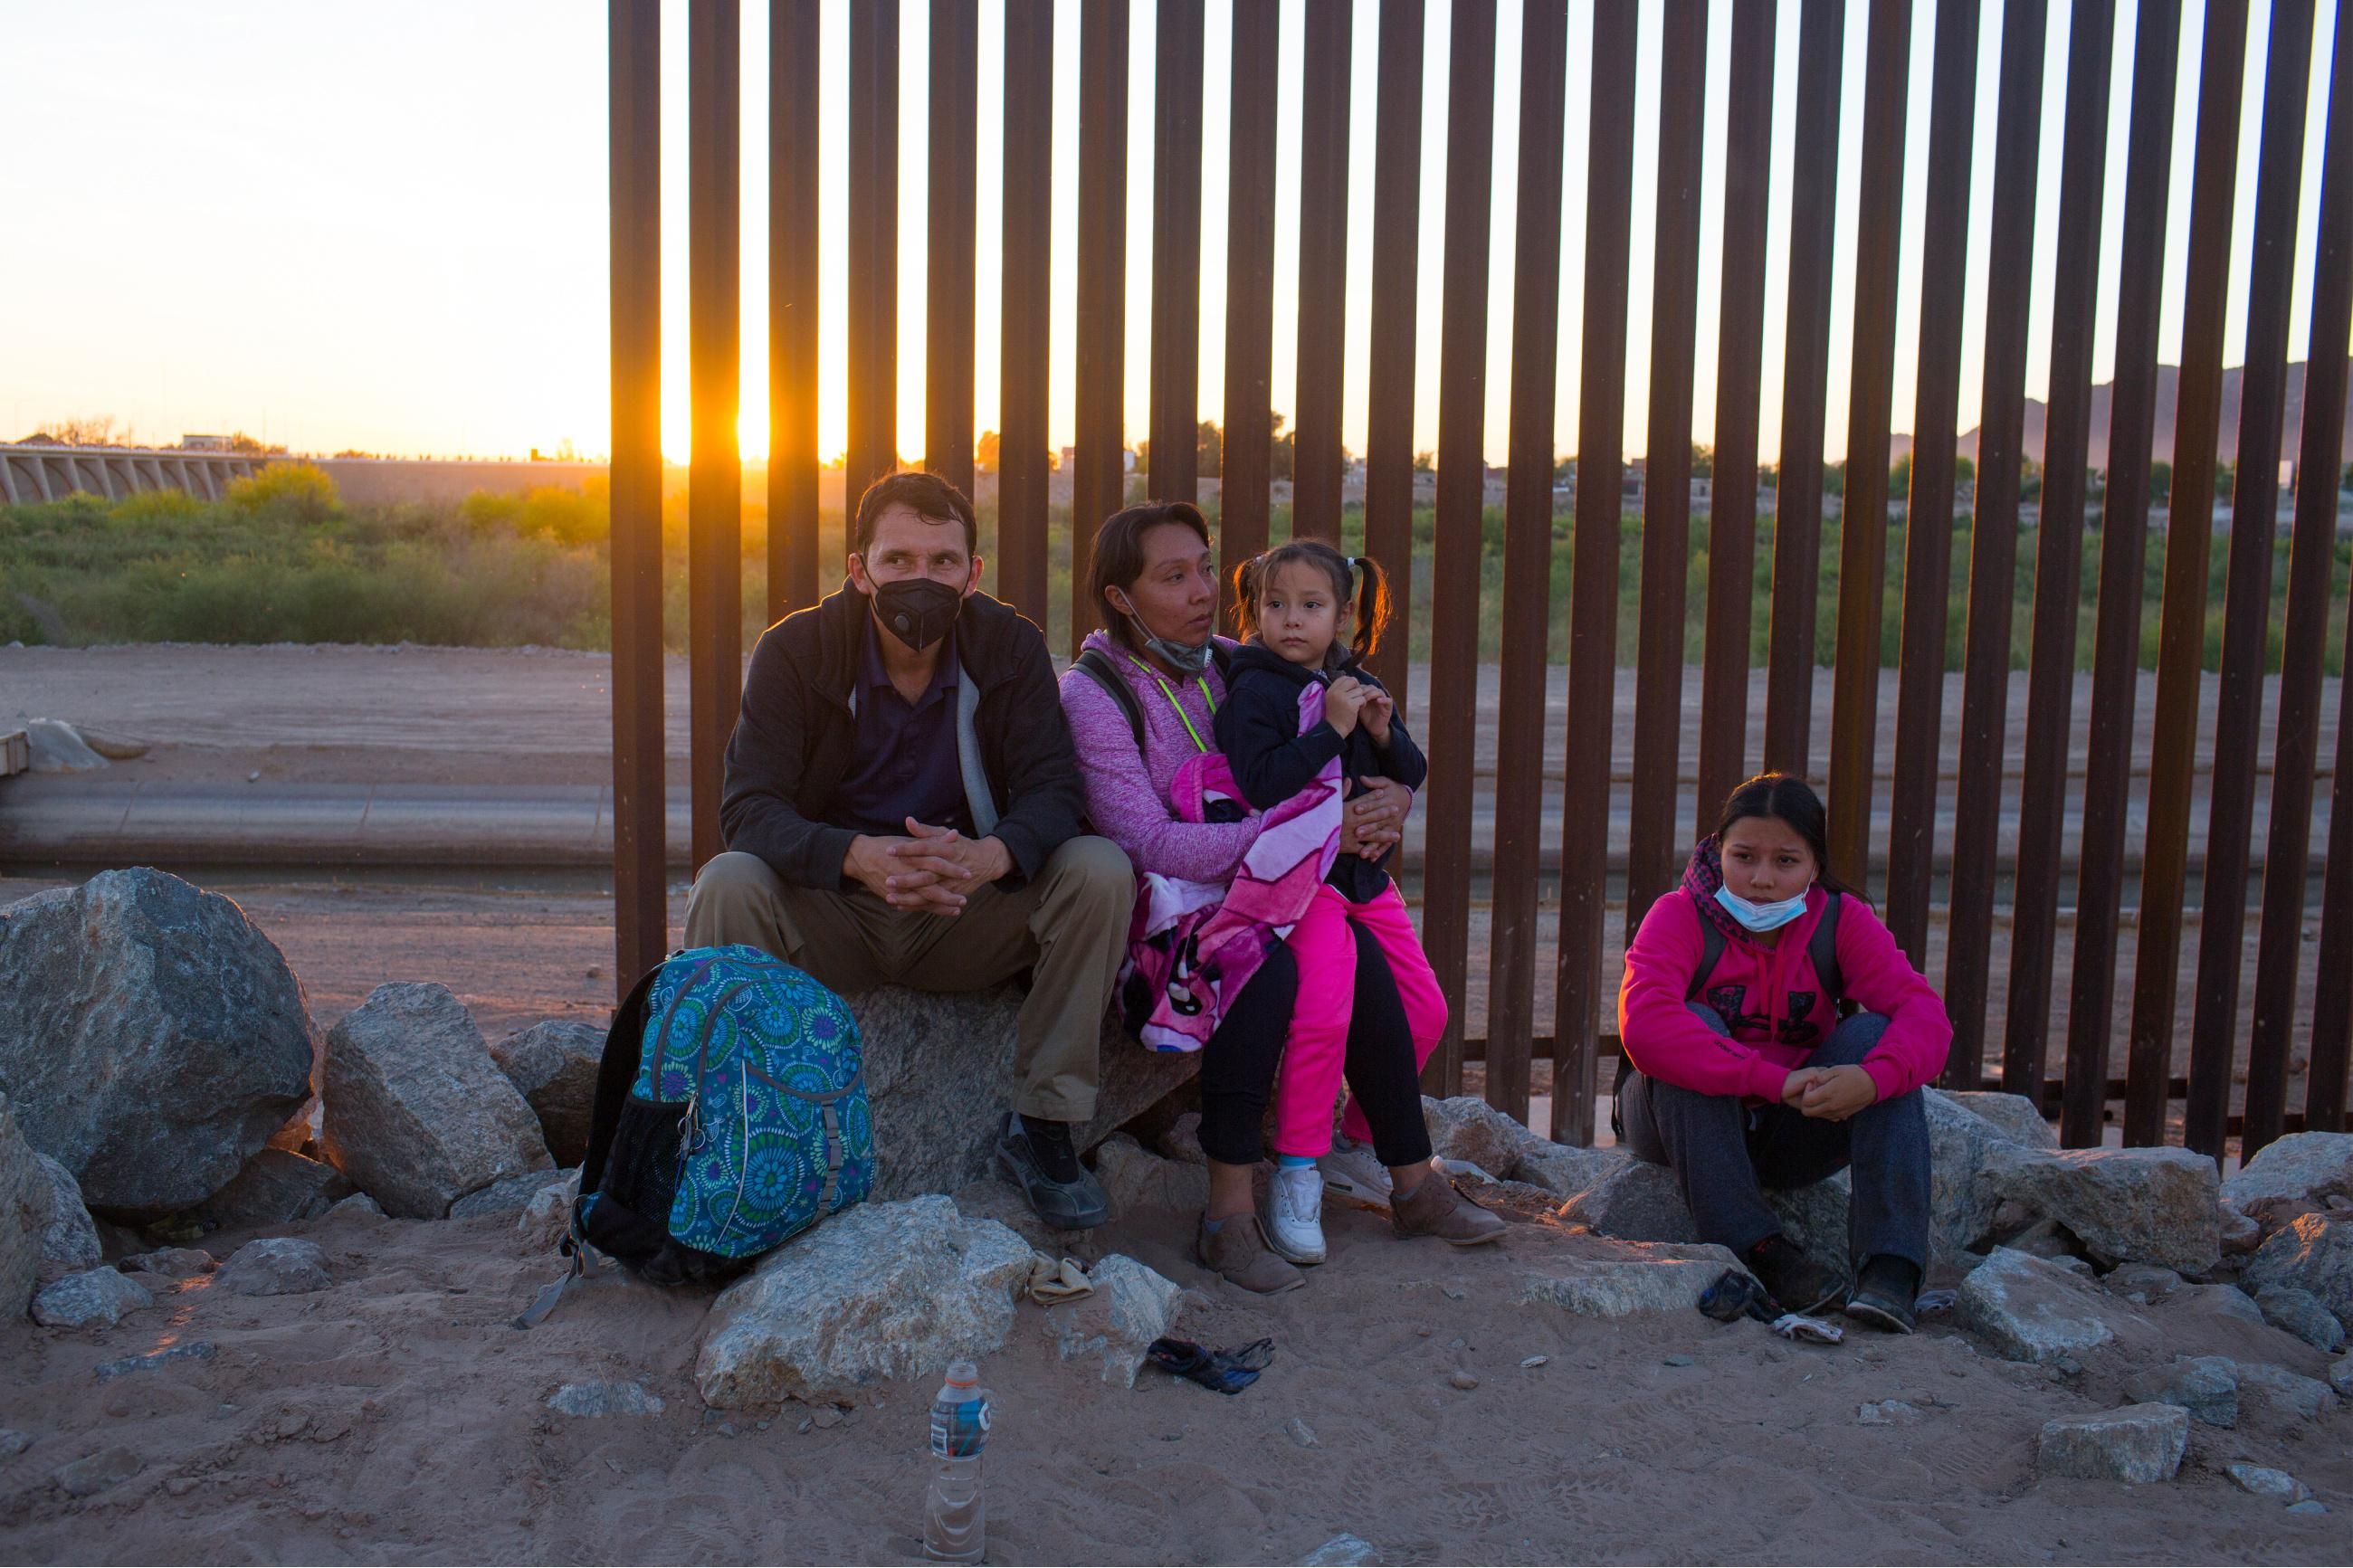 A migrant family from Central America waits to be processed by the U.S. Border Patrol after they crossed into the United States from Mexico on April 29, 2021 near Yuma, Arizona. (Photo: Andrew Lichtenstein/Corbis via Getty Images)